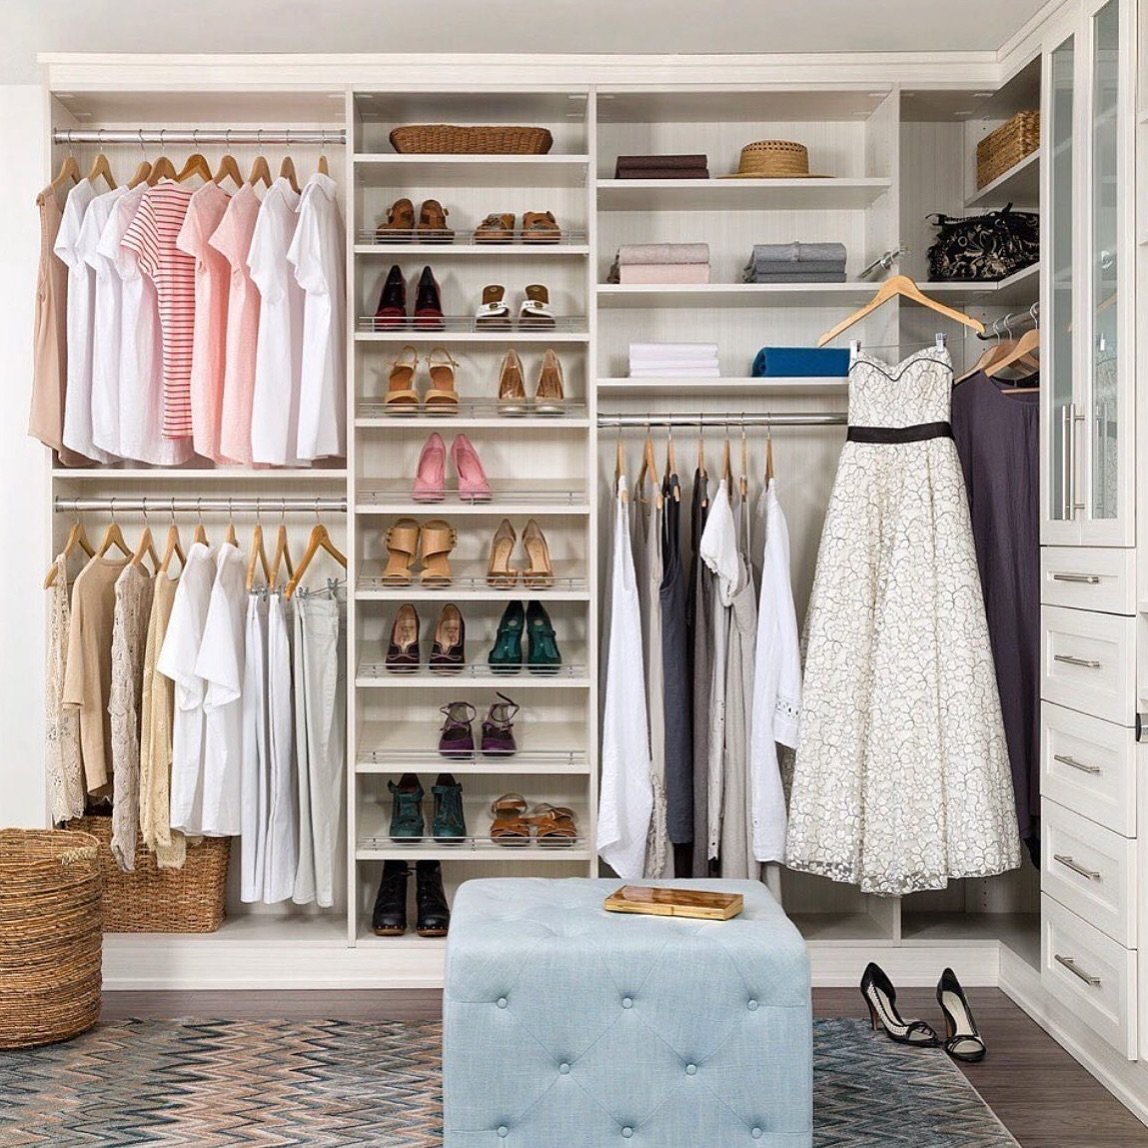 Customize the closet of your dreams! Whether you&rsquo;re downsizing, renovating, or simply spring cleaning, book your complimentary in-home design consultation today! 🌸
-
#simplyclosets #customclosets #customdesign #freeconsultation #virtualconsult